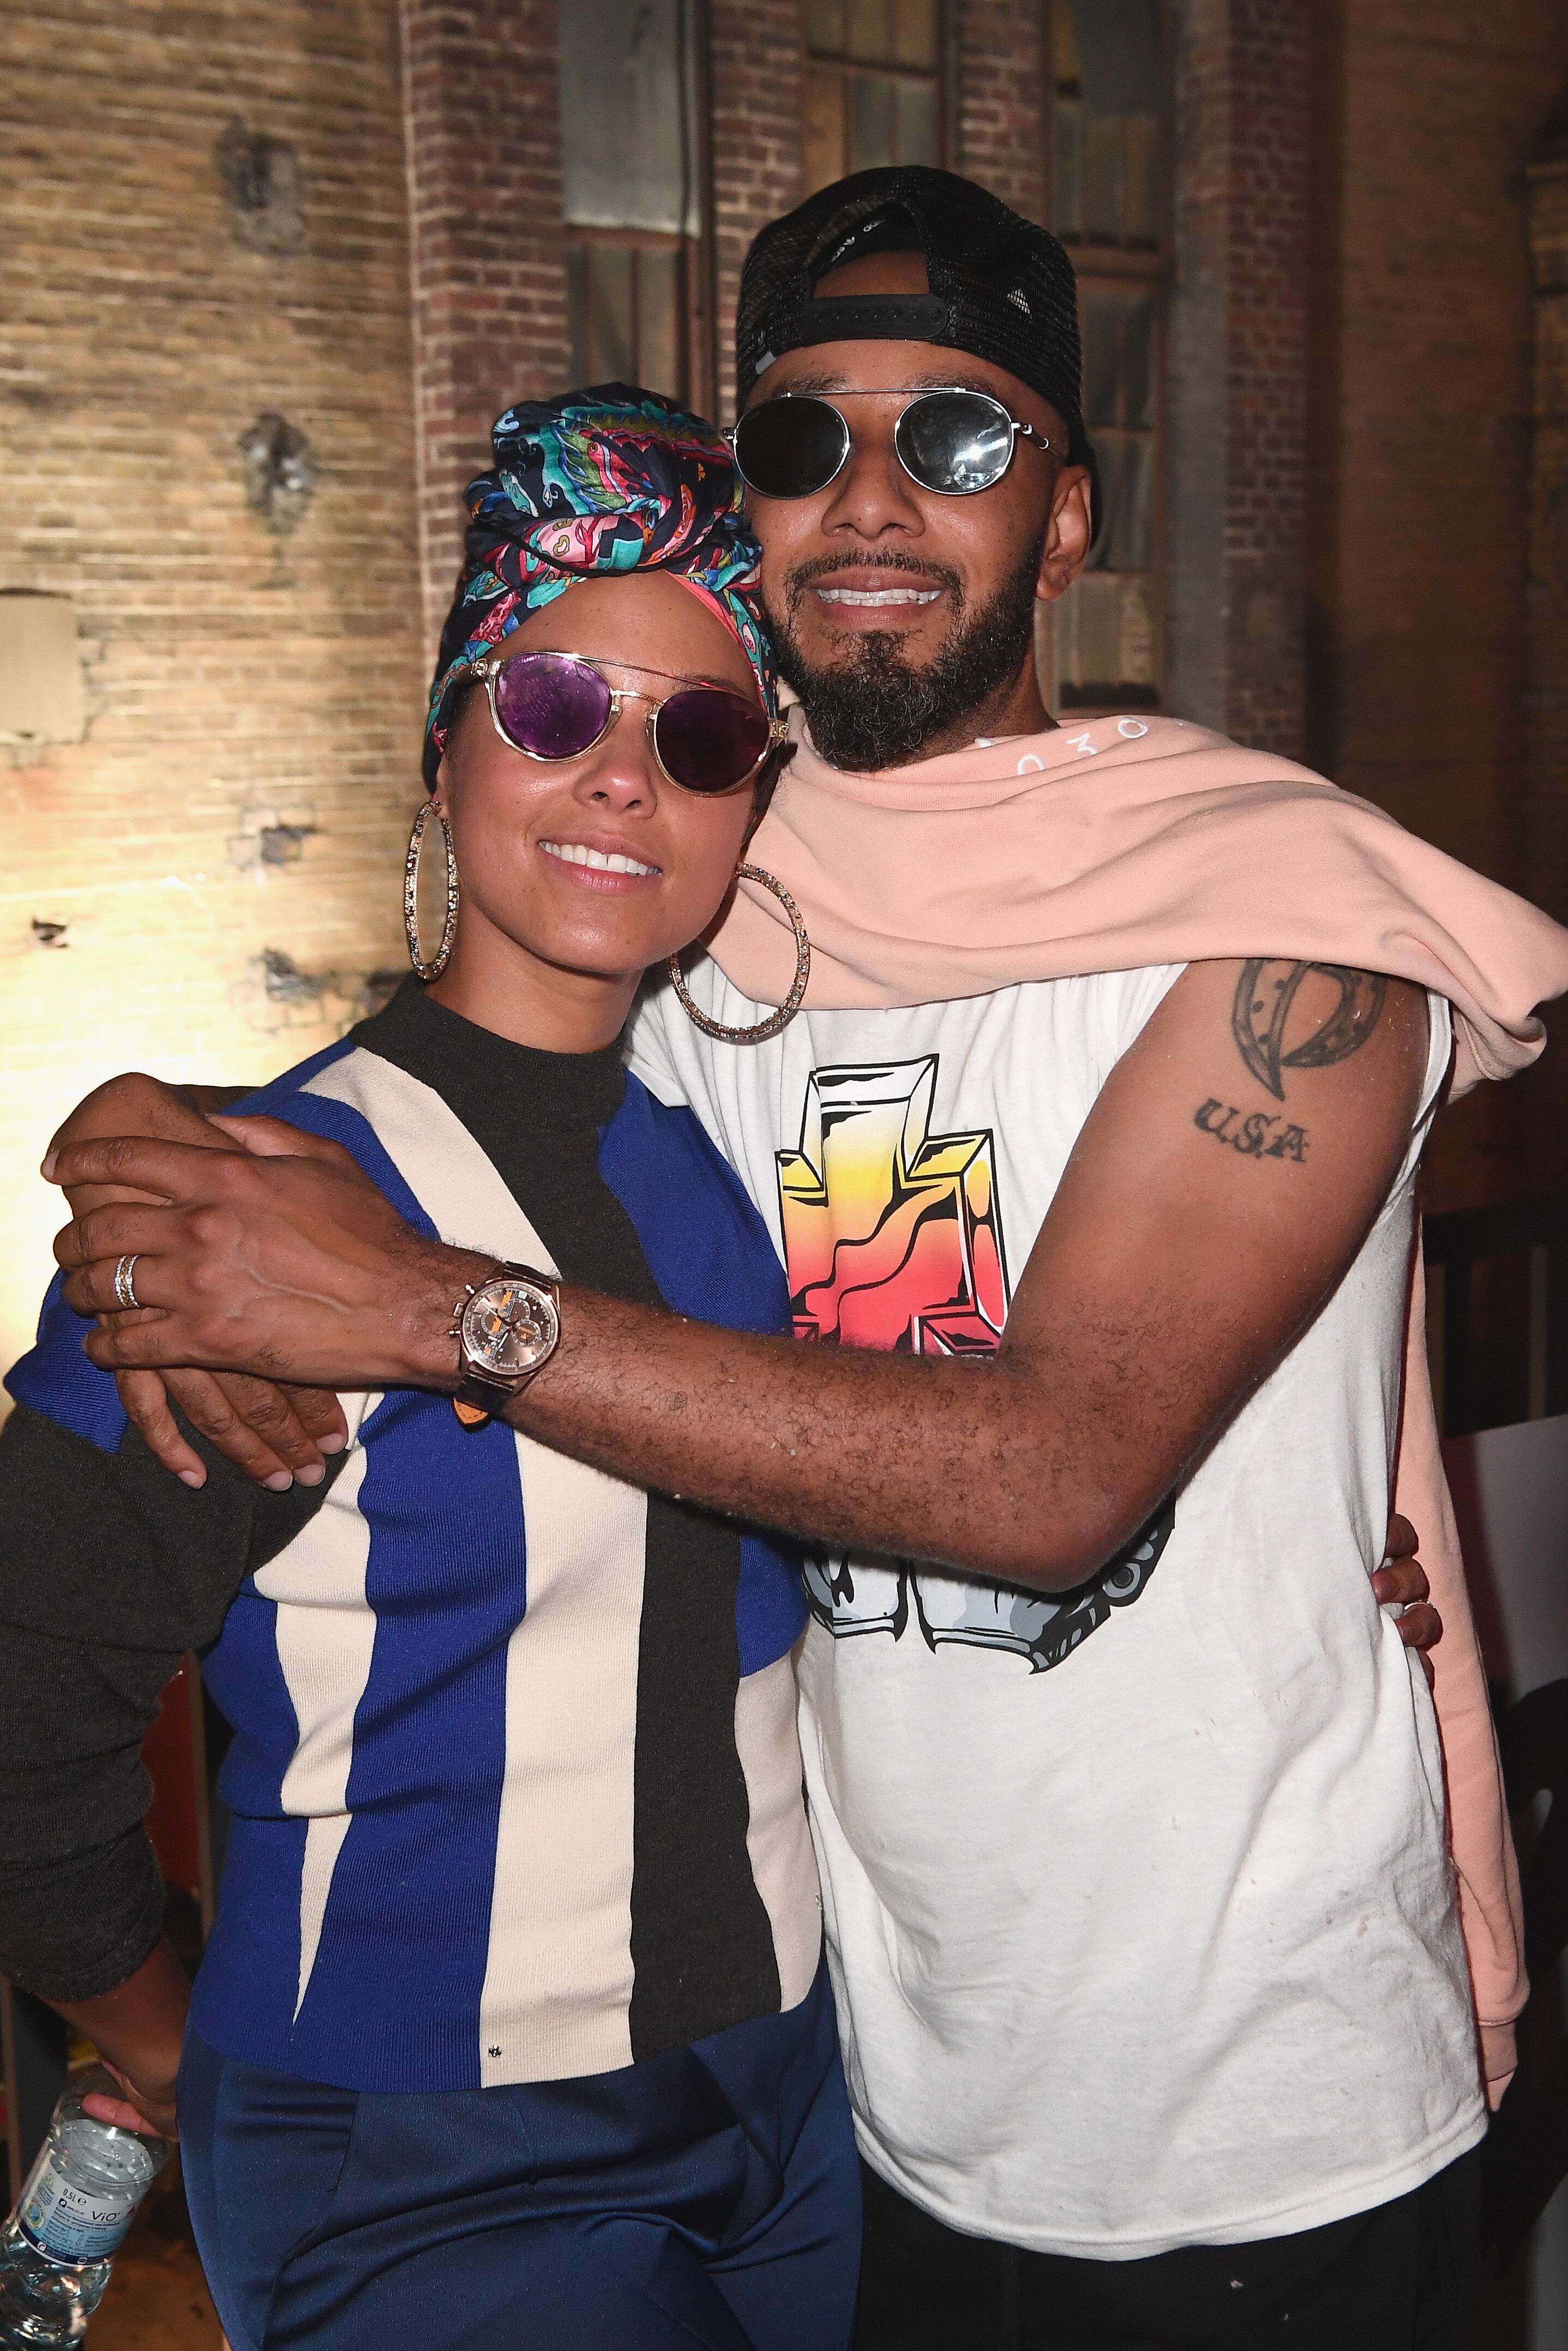 Swizz Beatz and Alicia Keys at the "The Dean Collection Present: No Commission" in 2017 in Berlin | Source: Getty Images